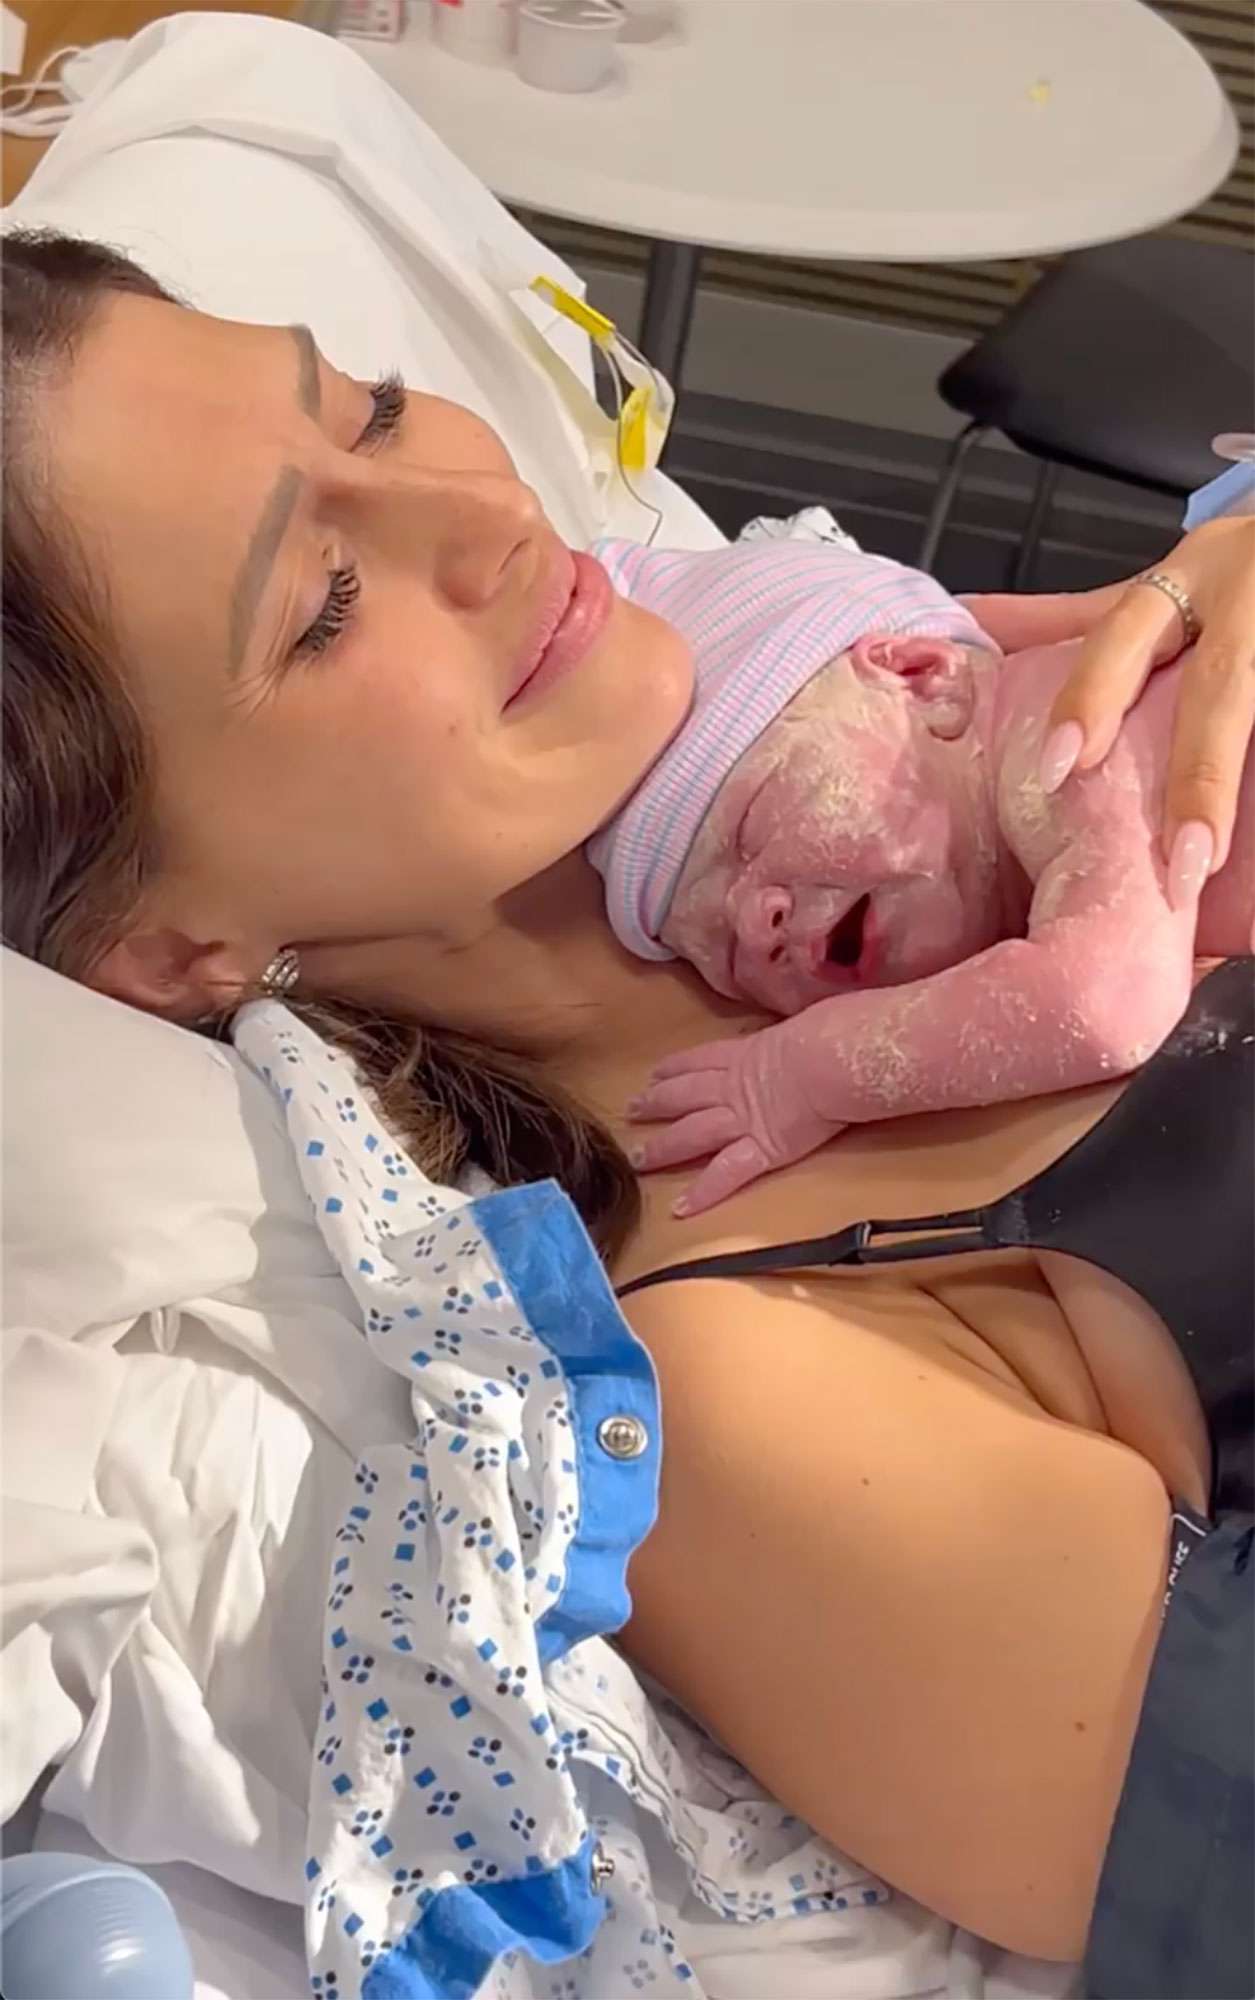 Hilaria Baldwin Reveals That She and Alec Baldwin Have Welcomed Their Seventh Baby: 'We Are Overjoyed'. https://www.instagram.com/p/Ci51suhDuSS/.